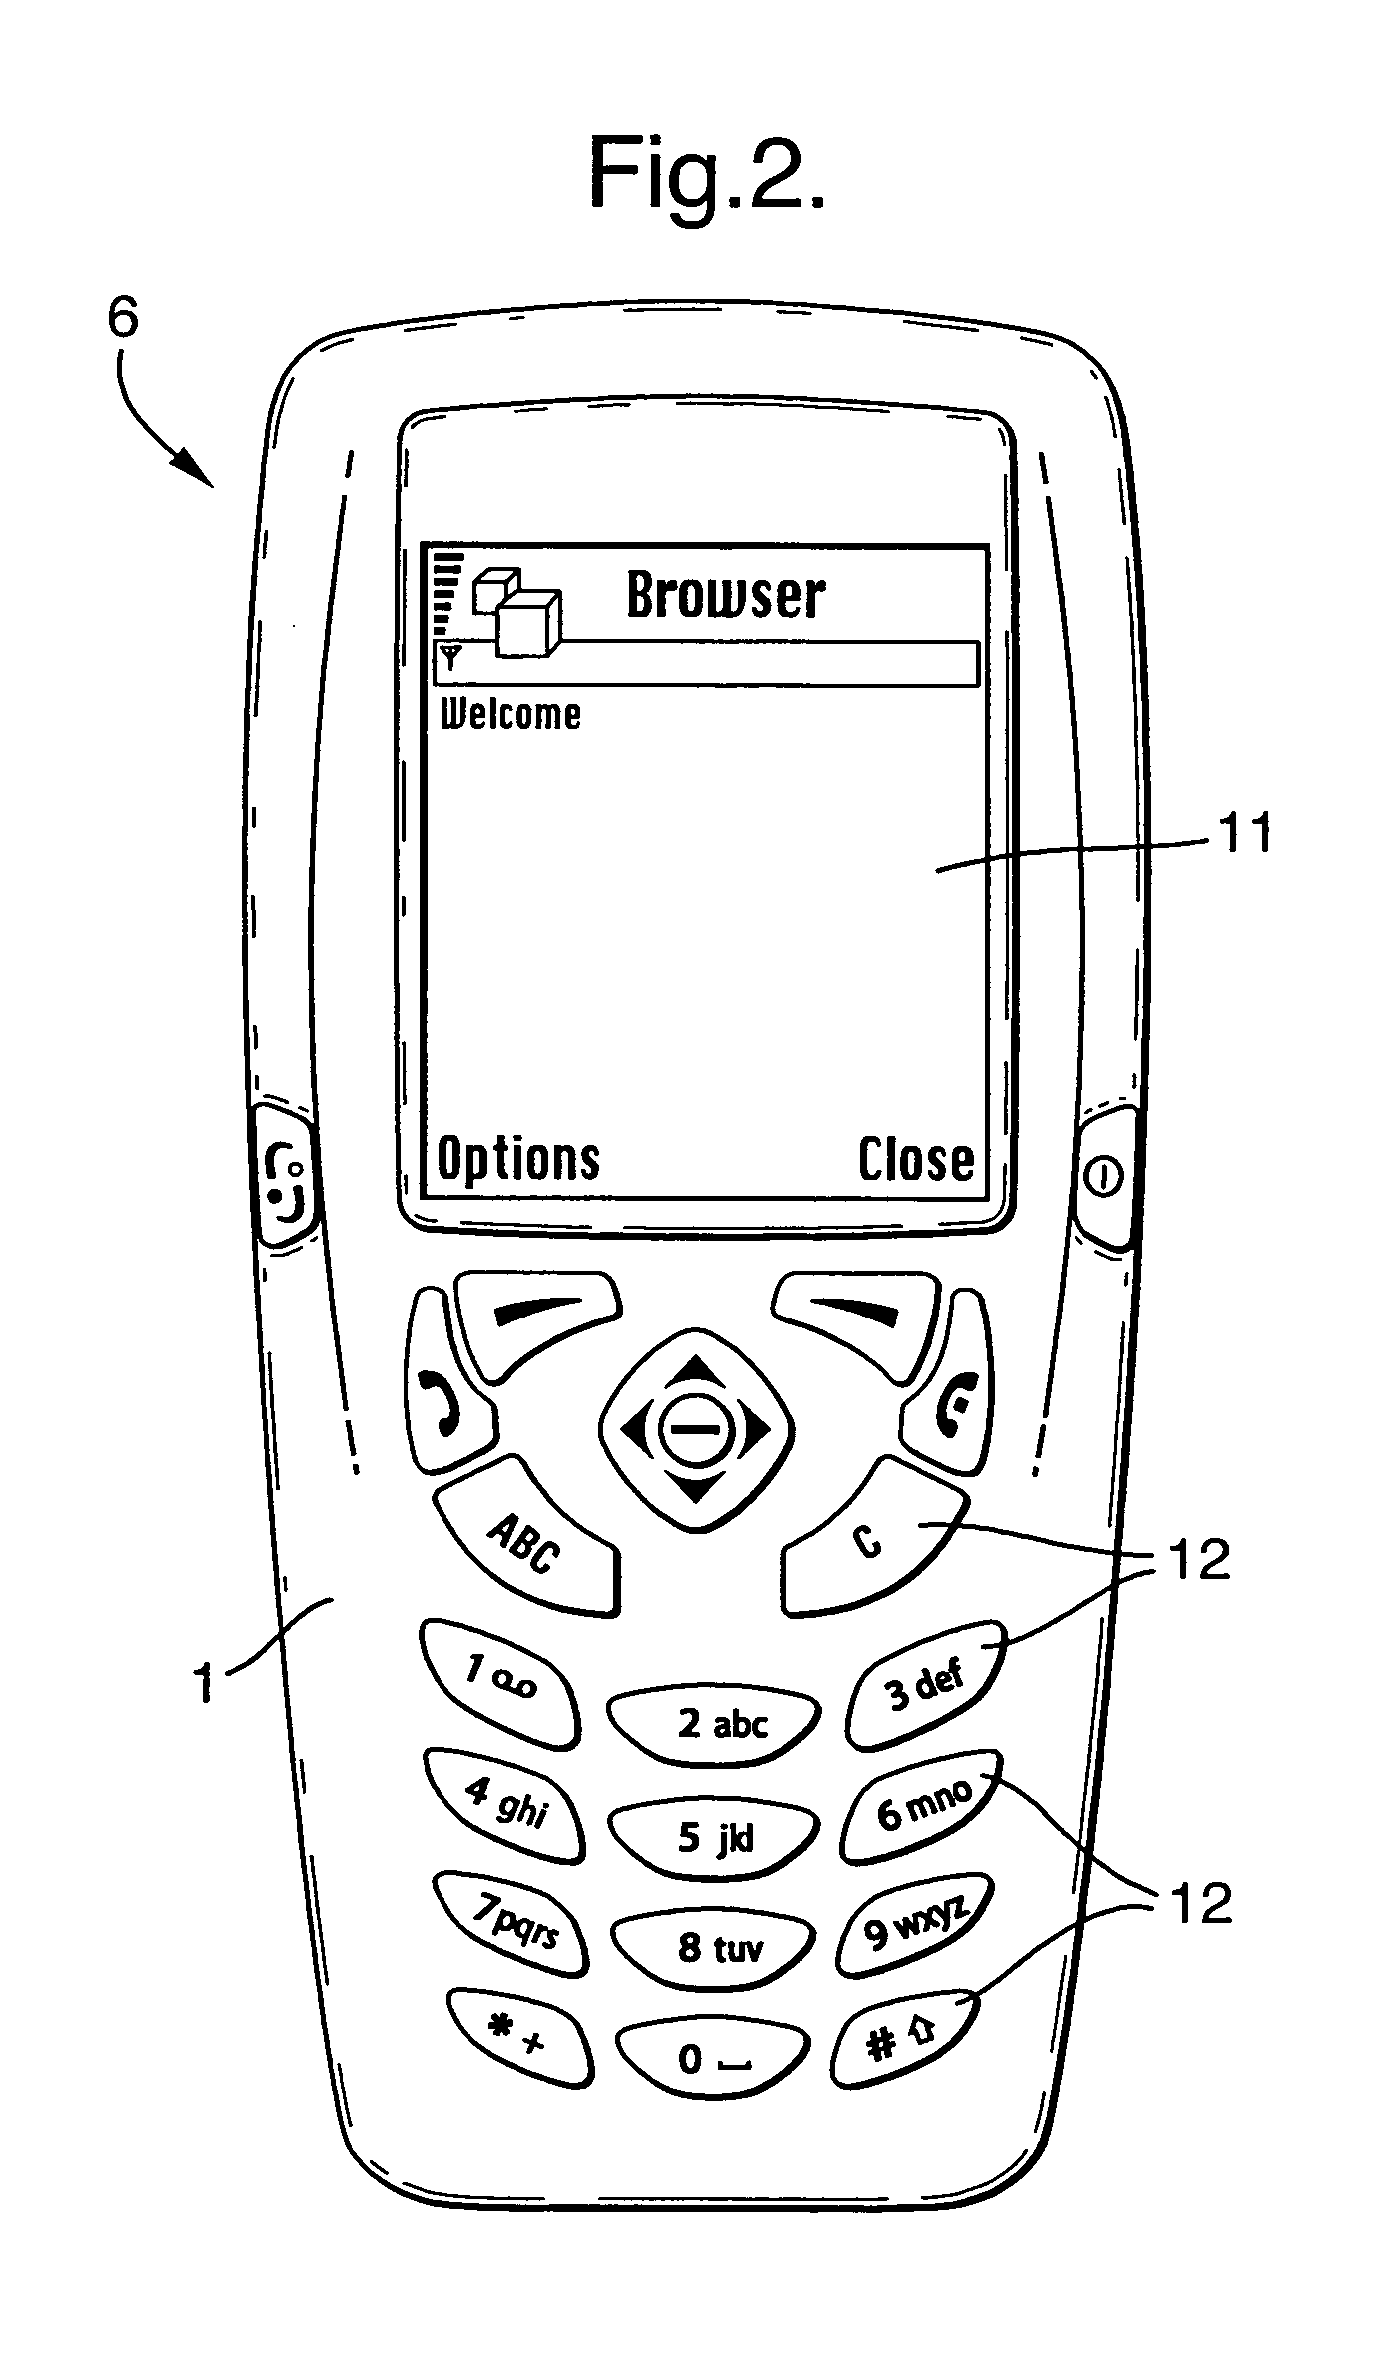 Mobile phone image display system